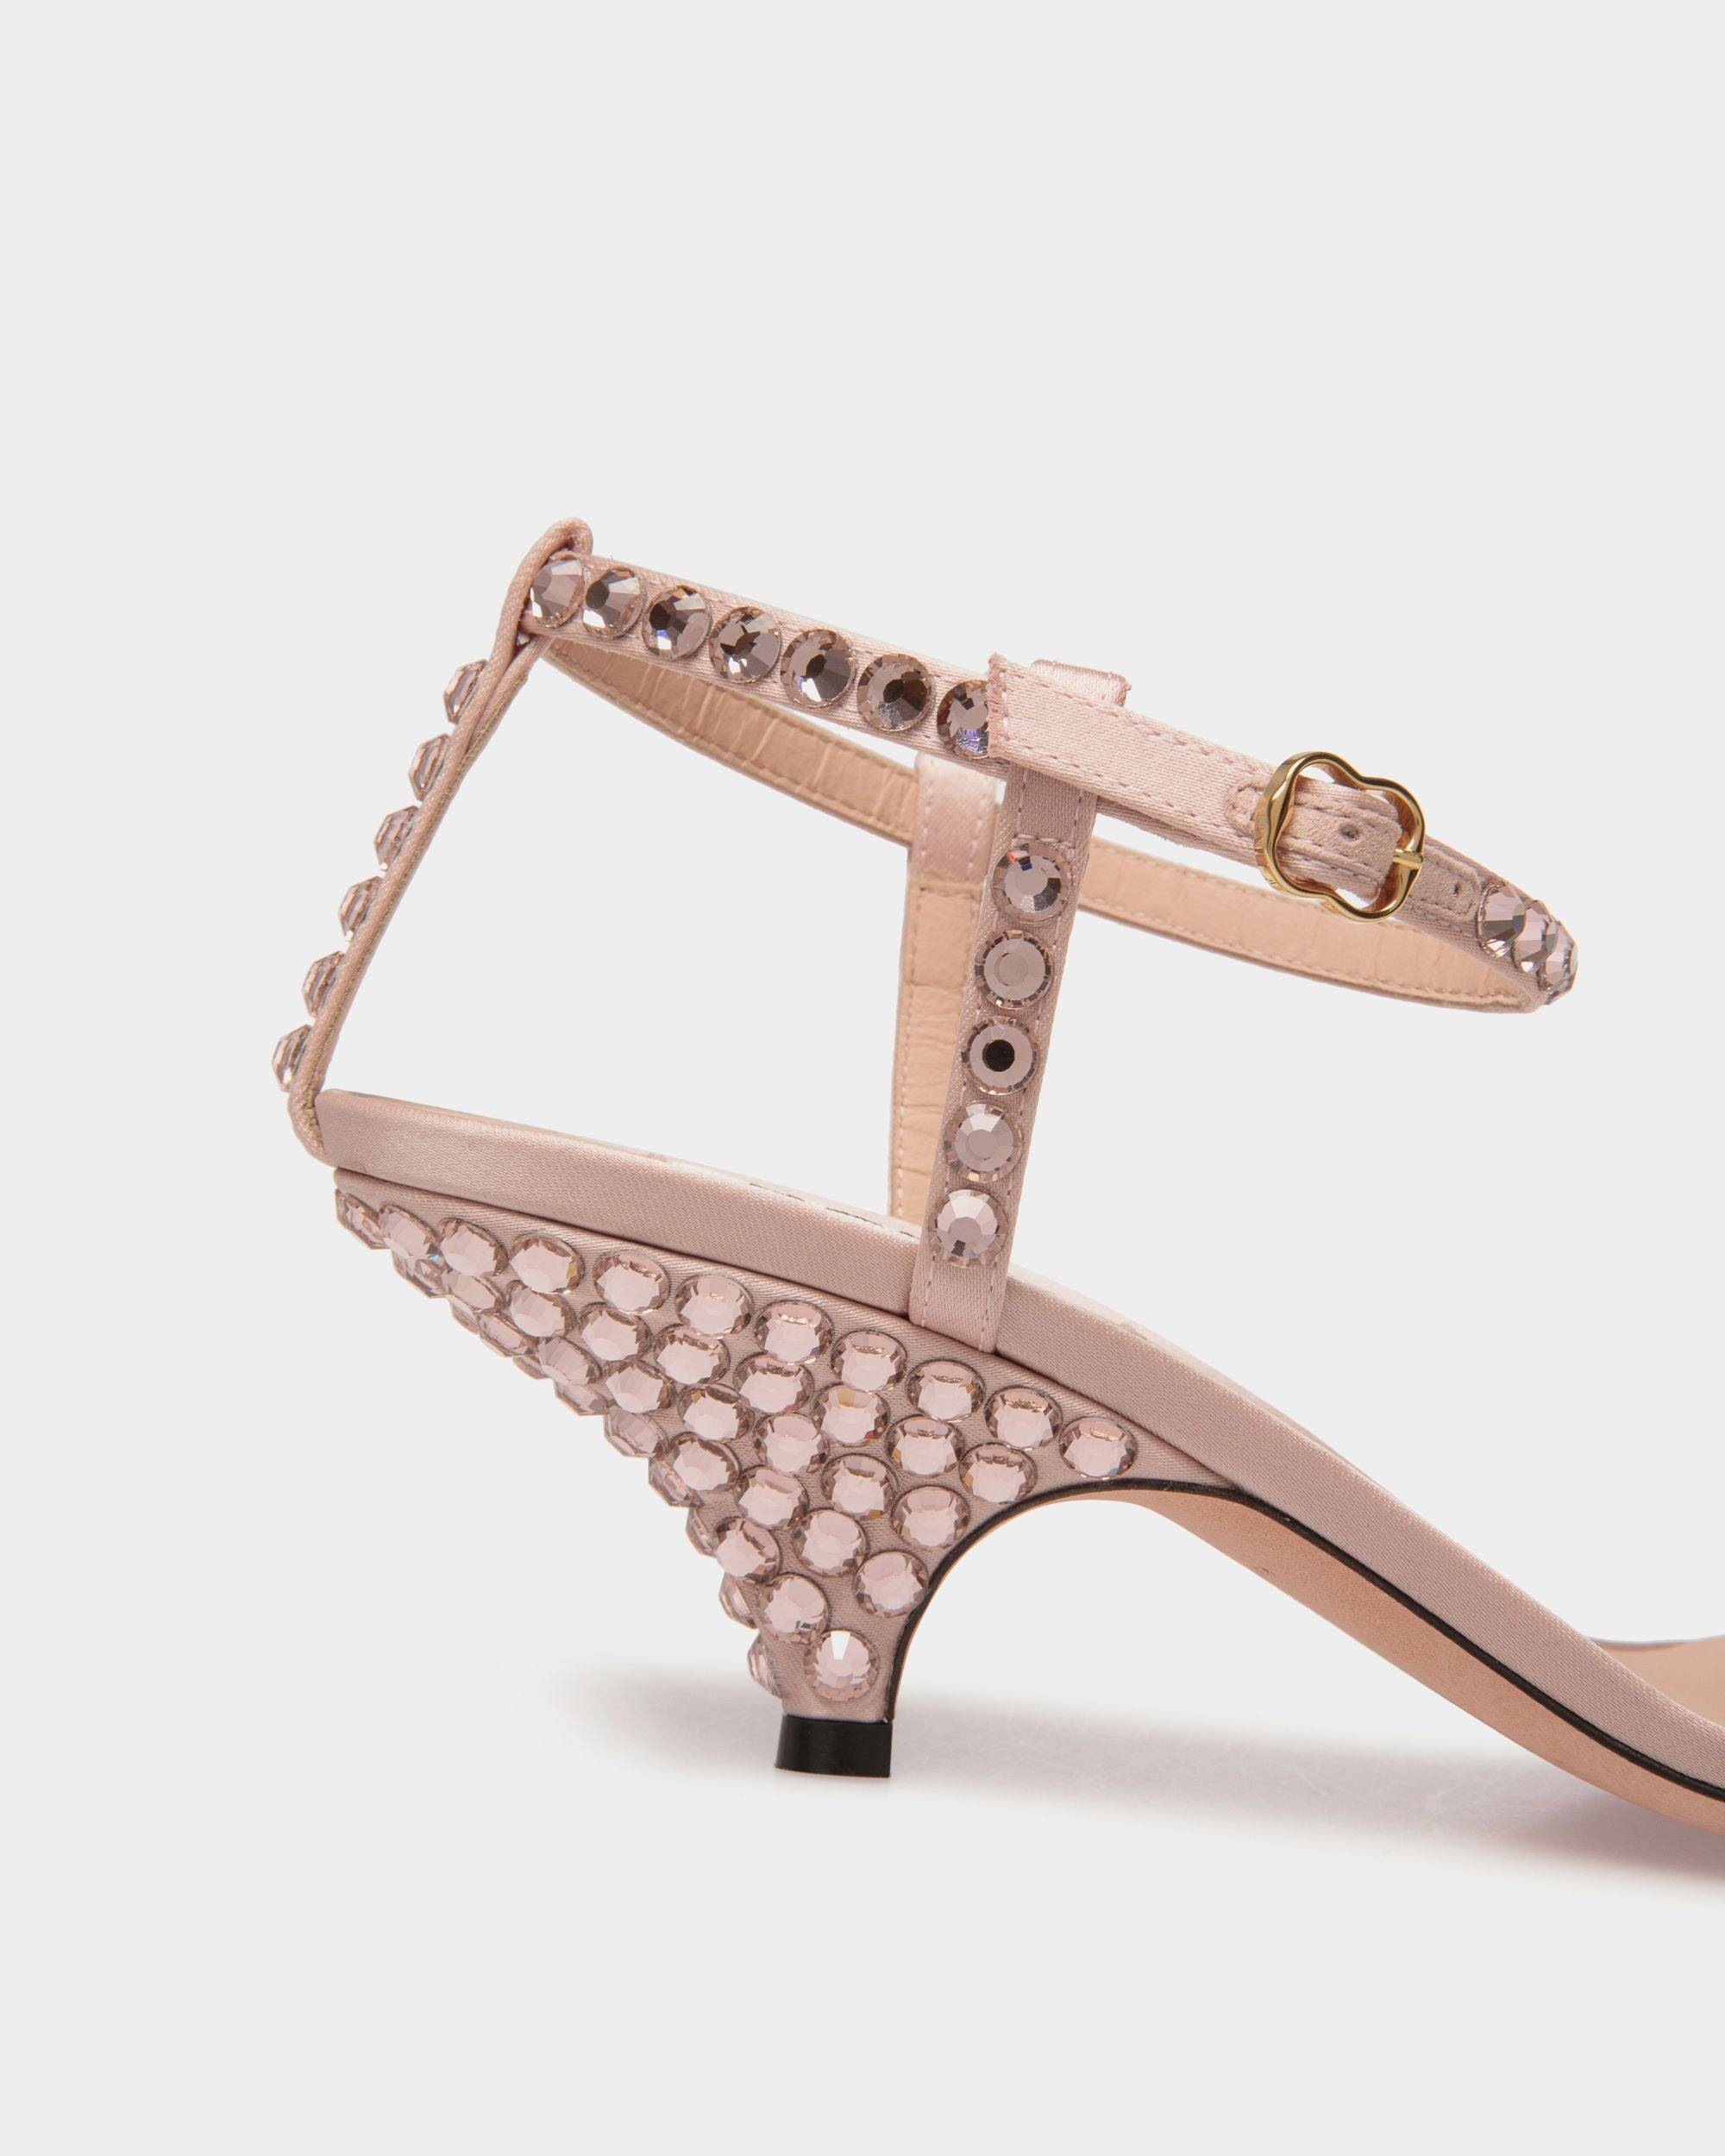 Katy | Women's Heeled Sandal in Light Pink Fabric with Crystals | Bally | Still Life Detail